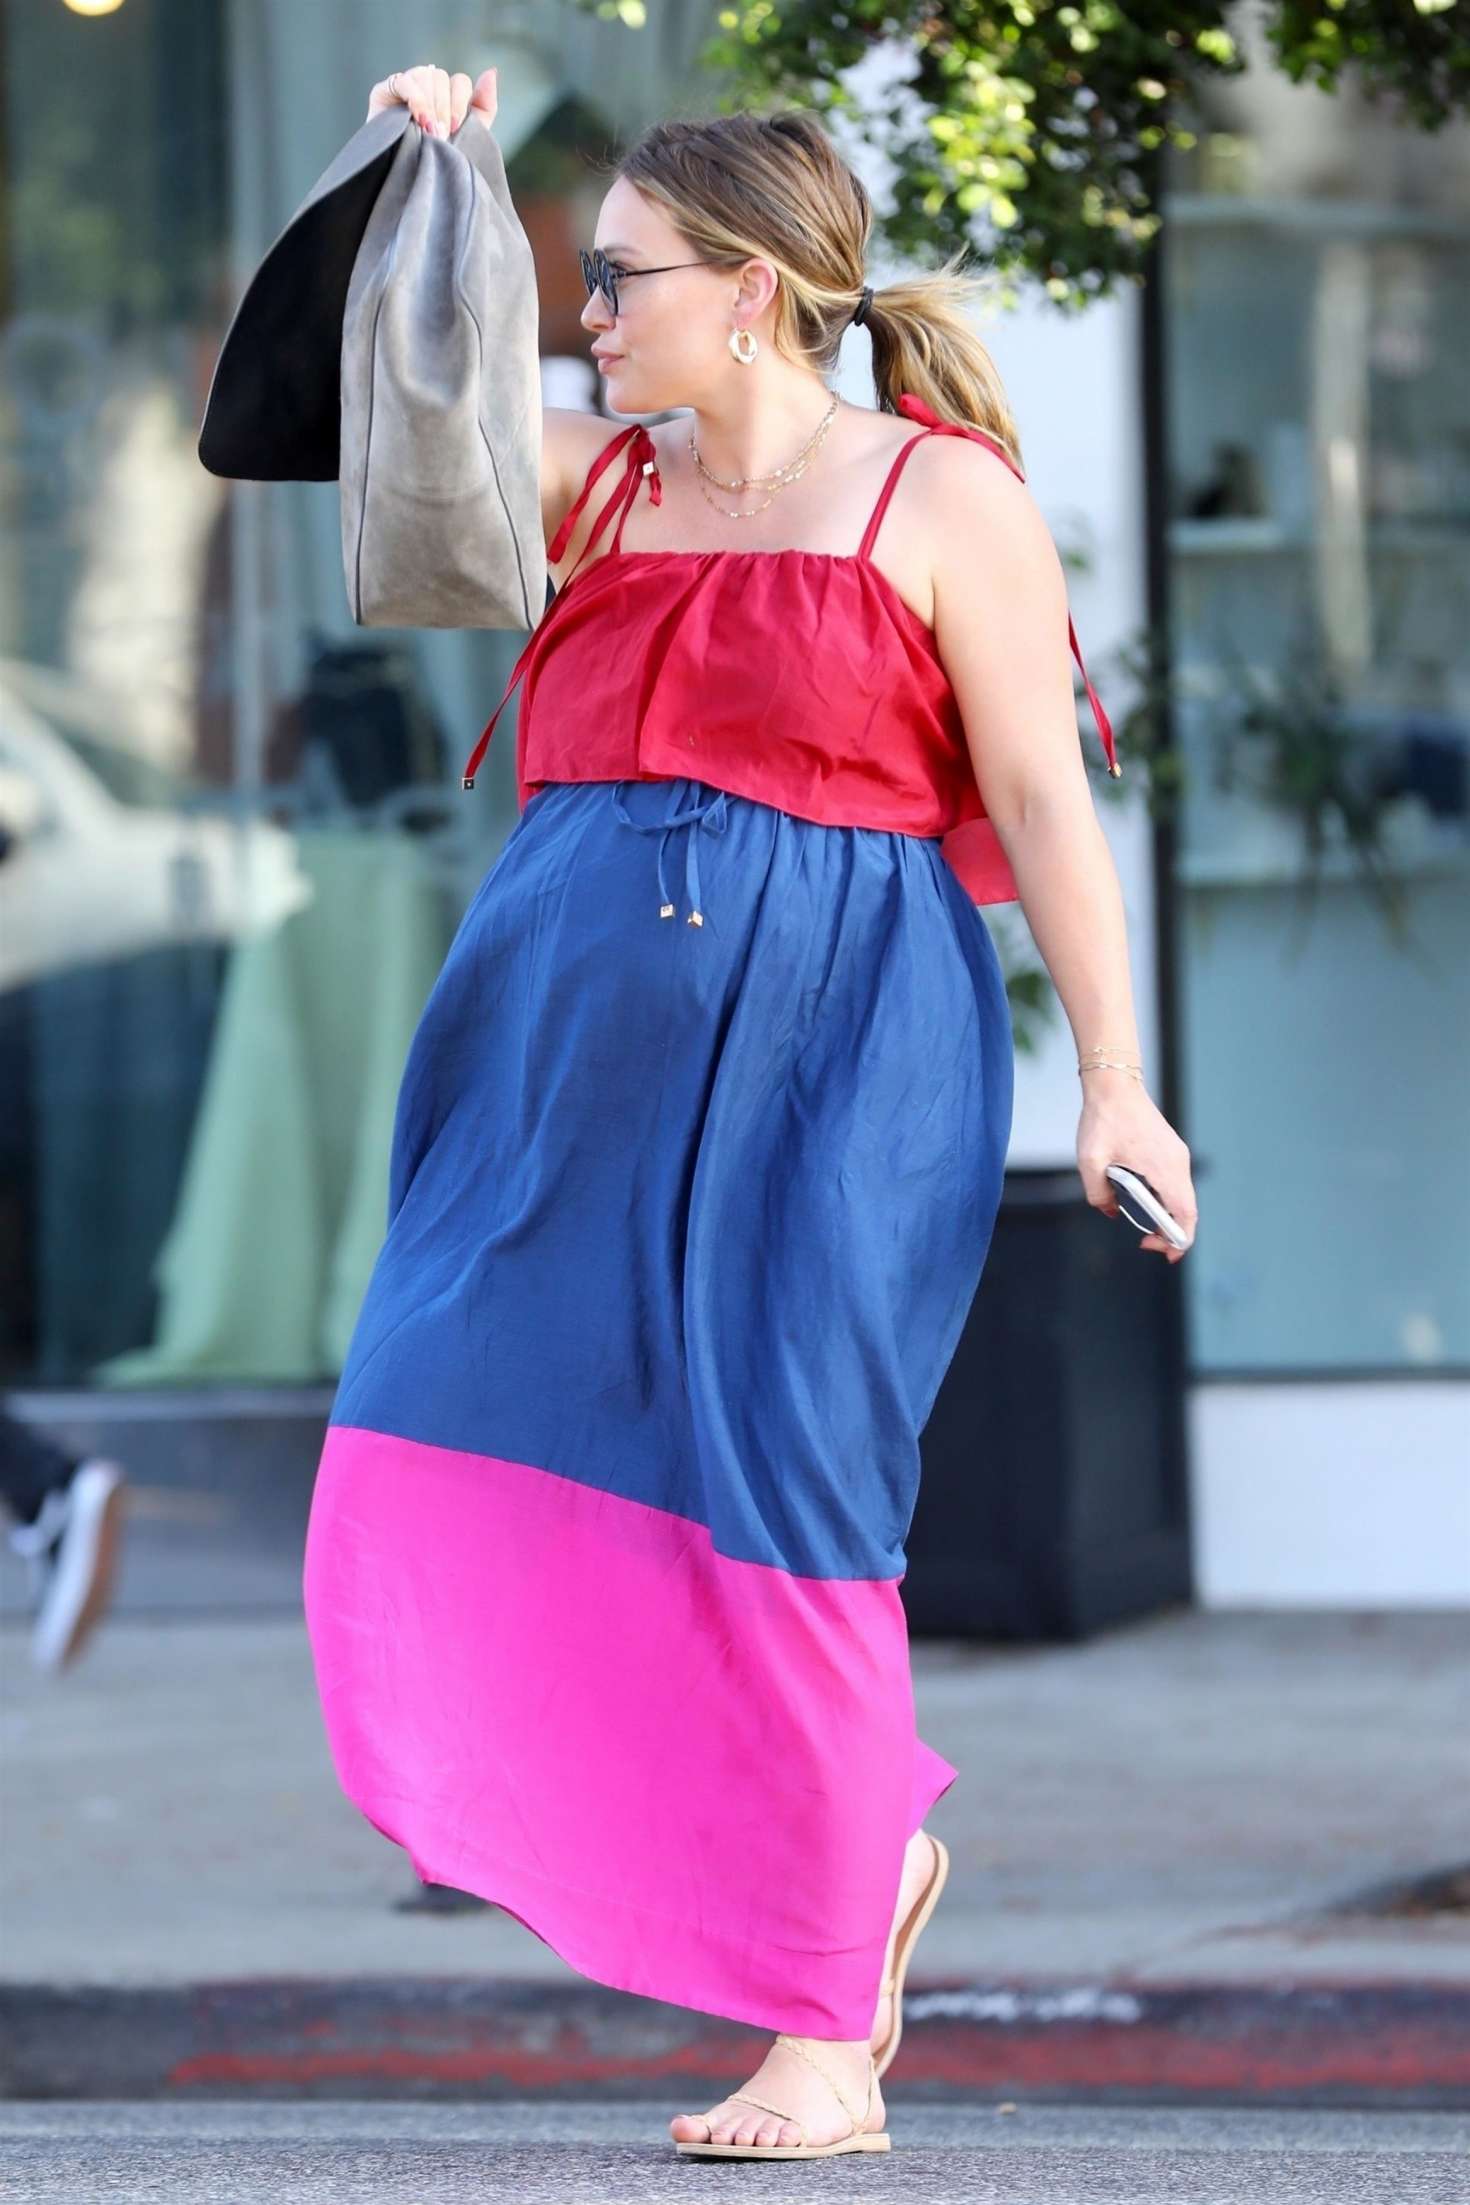 Hilary Duff in Colorful Dress â€“ Out in West Hollywood